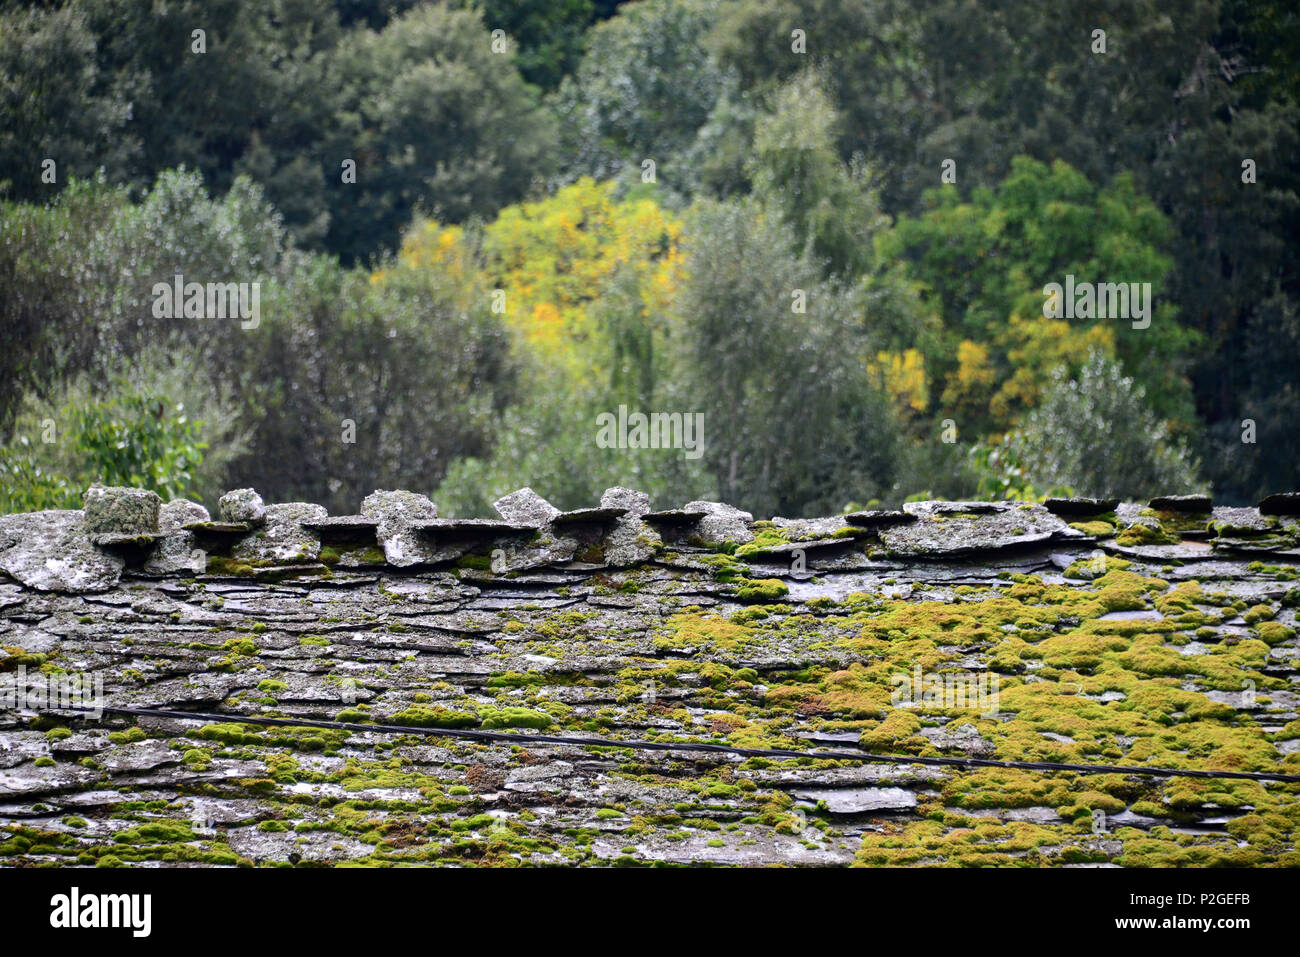 Slate roof in Parque Natural Montesinho bei Braganca, Tras-os-Montes, Northeast-Portugal, Portugal Stock Photo